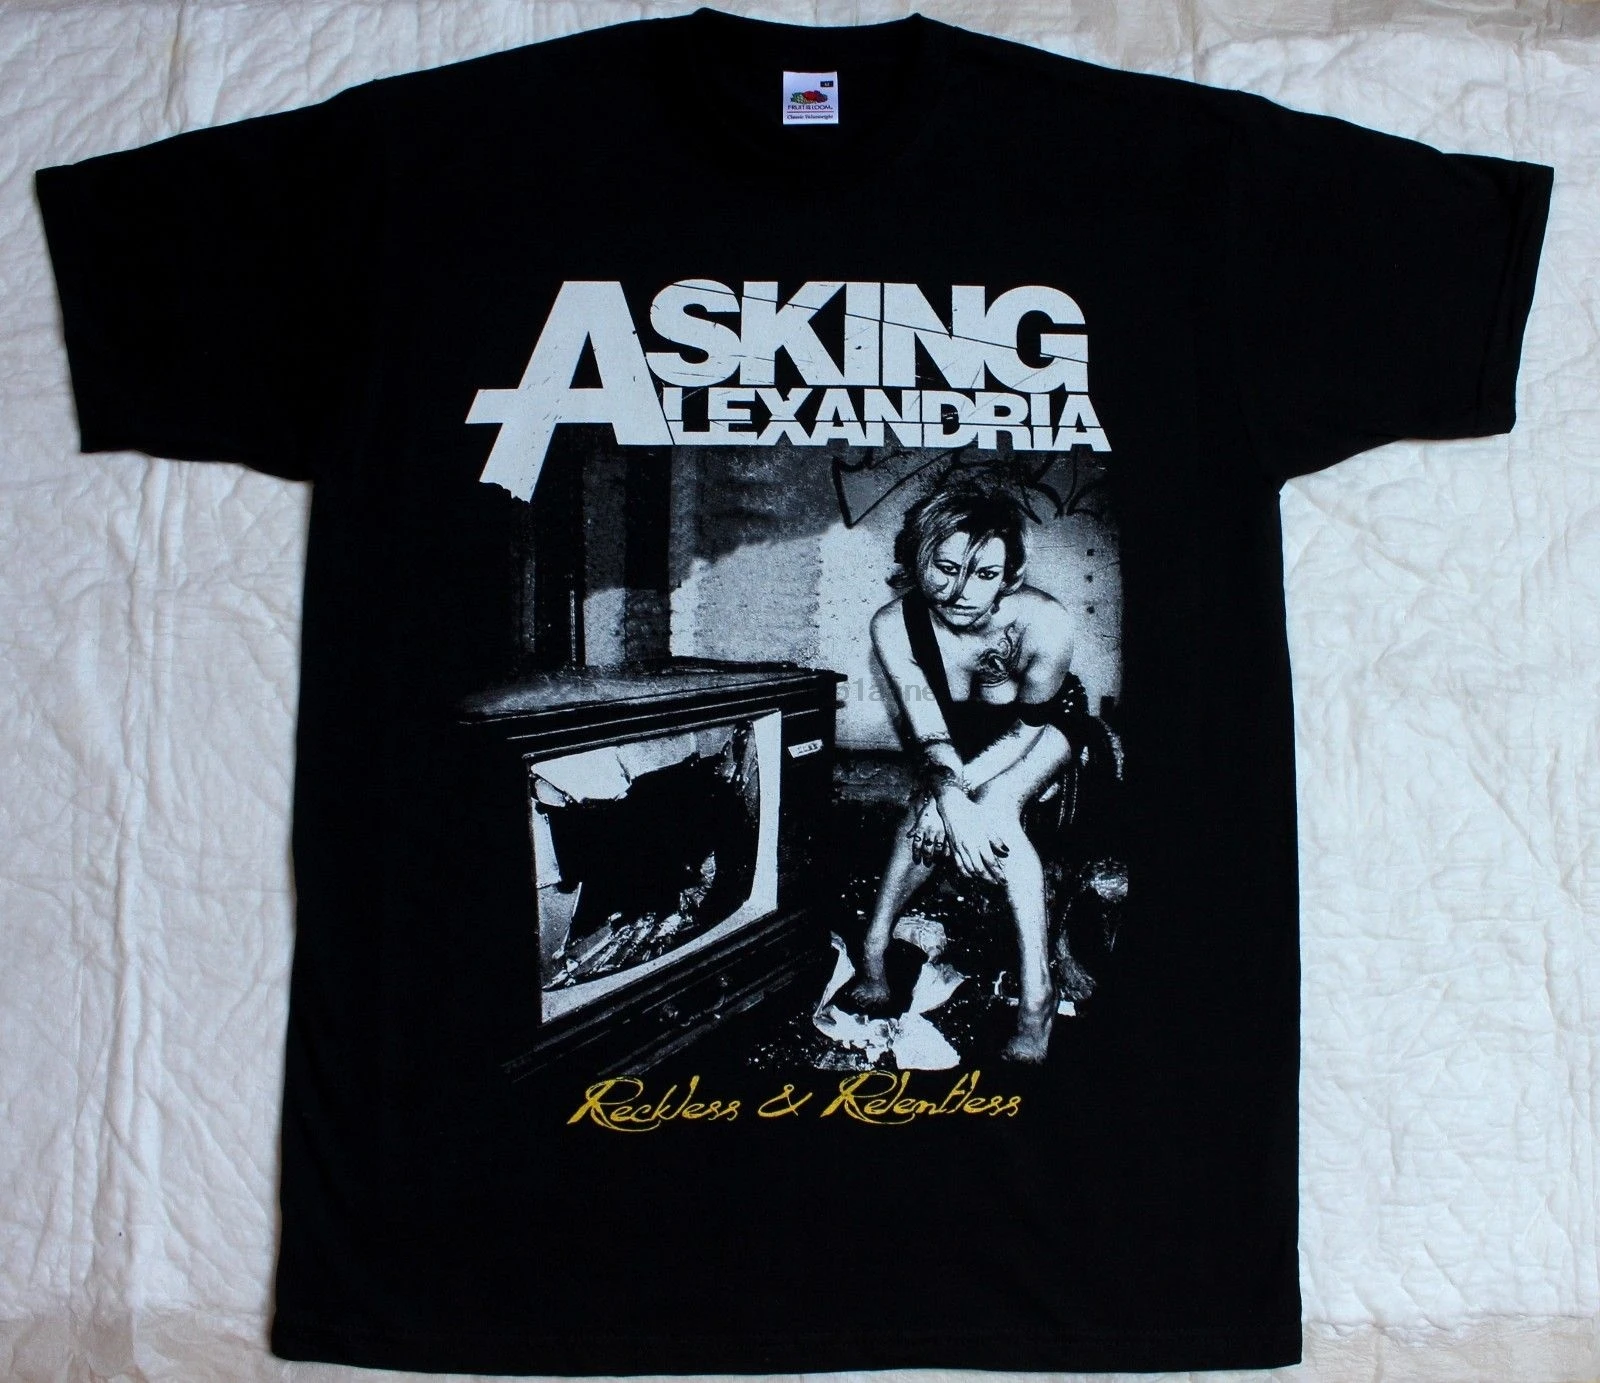 

ASKING ALEXANDRIA RECKLESS AND RELENTLESS METALCORE BLACK T-SHIRT Fashion T Shirts Slim Fit O-Neck Top Tee Plus Size